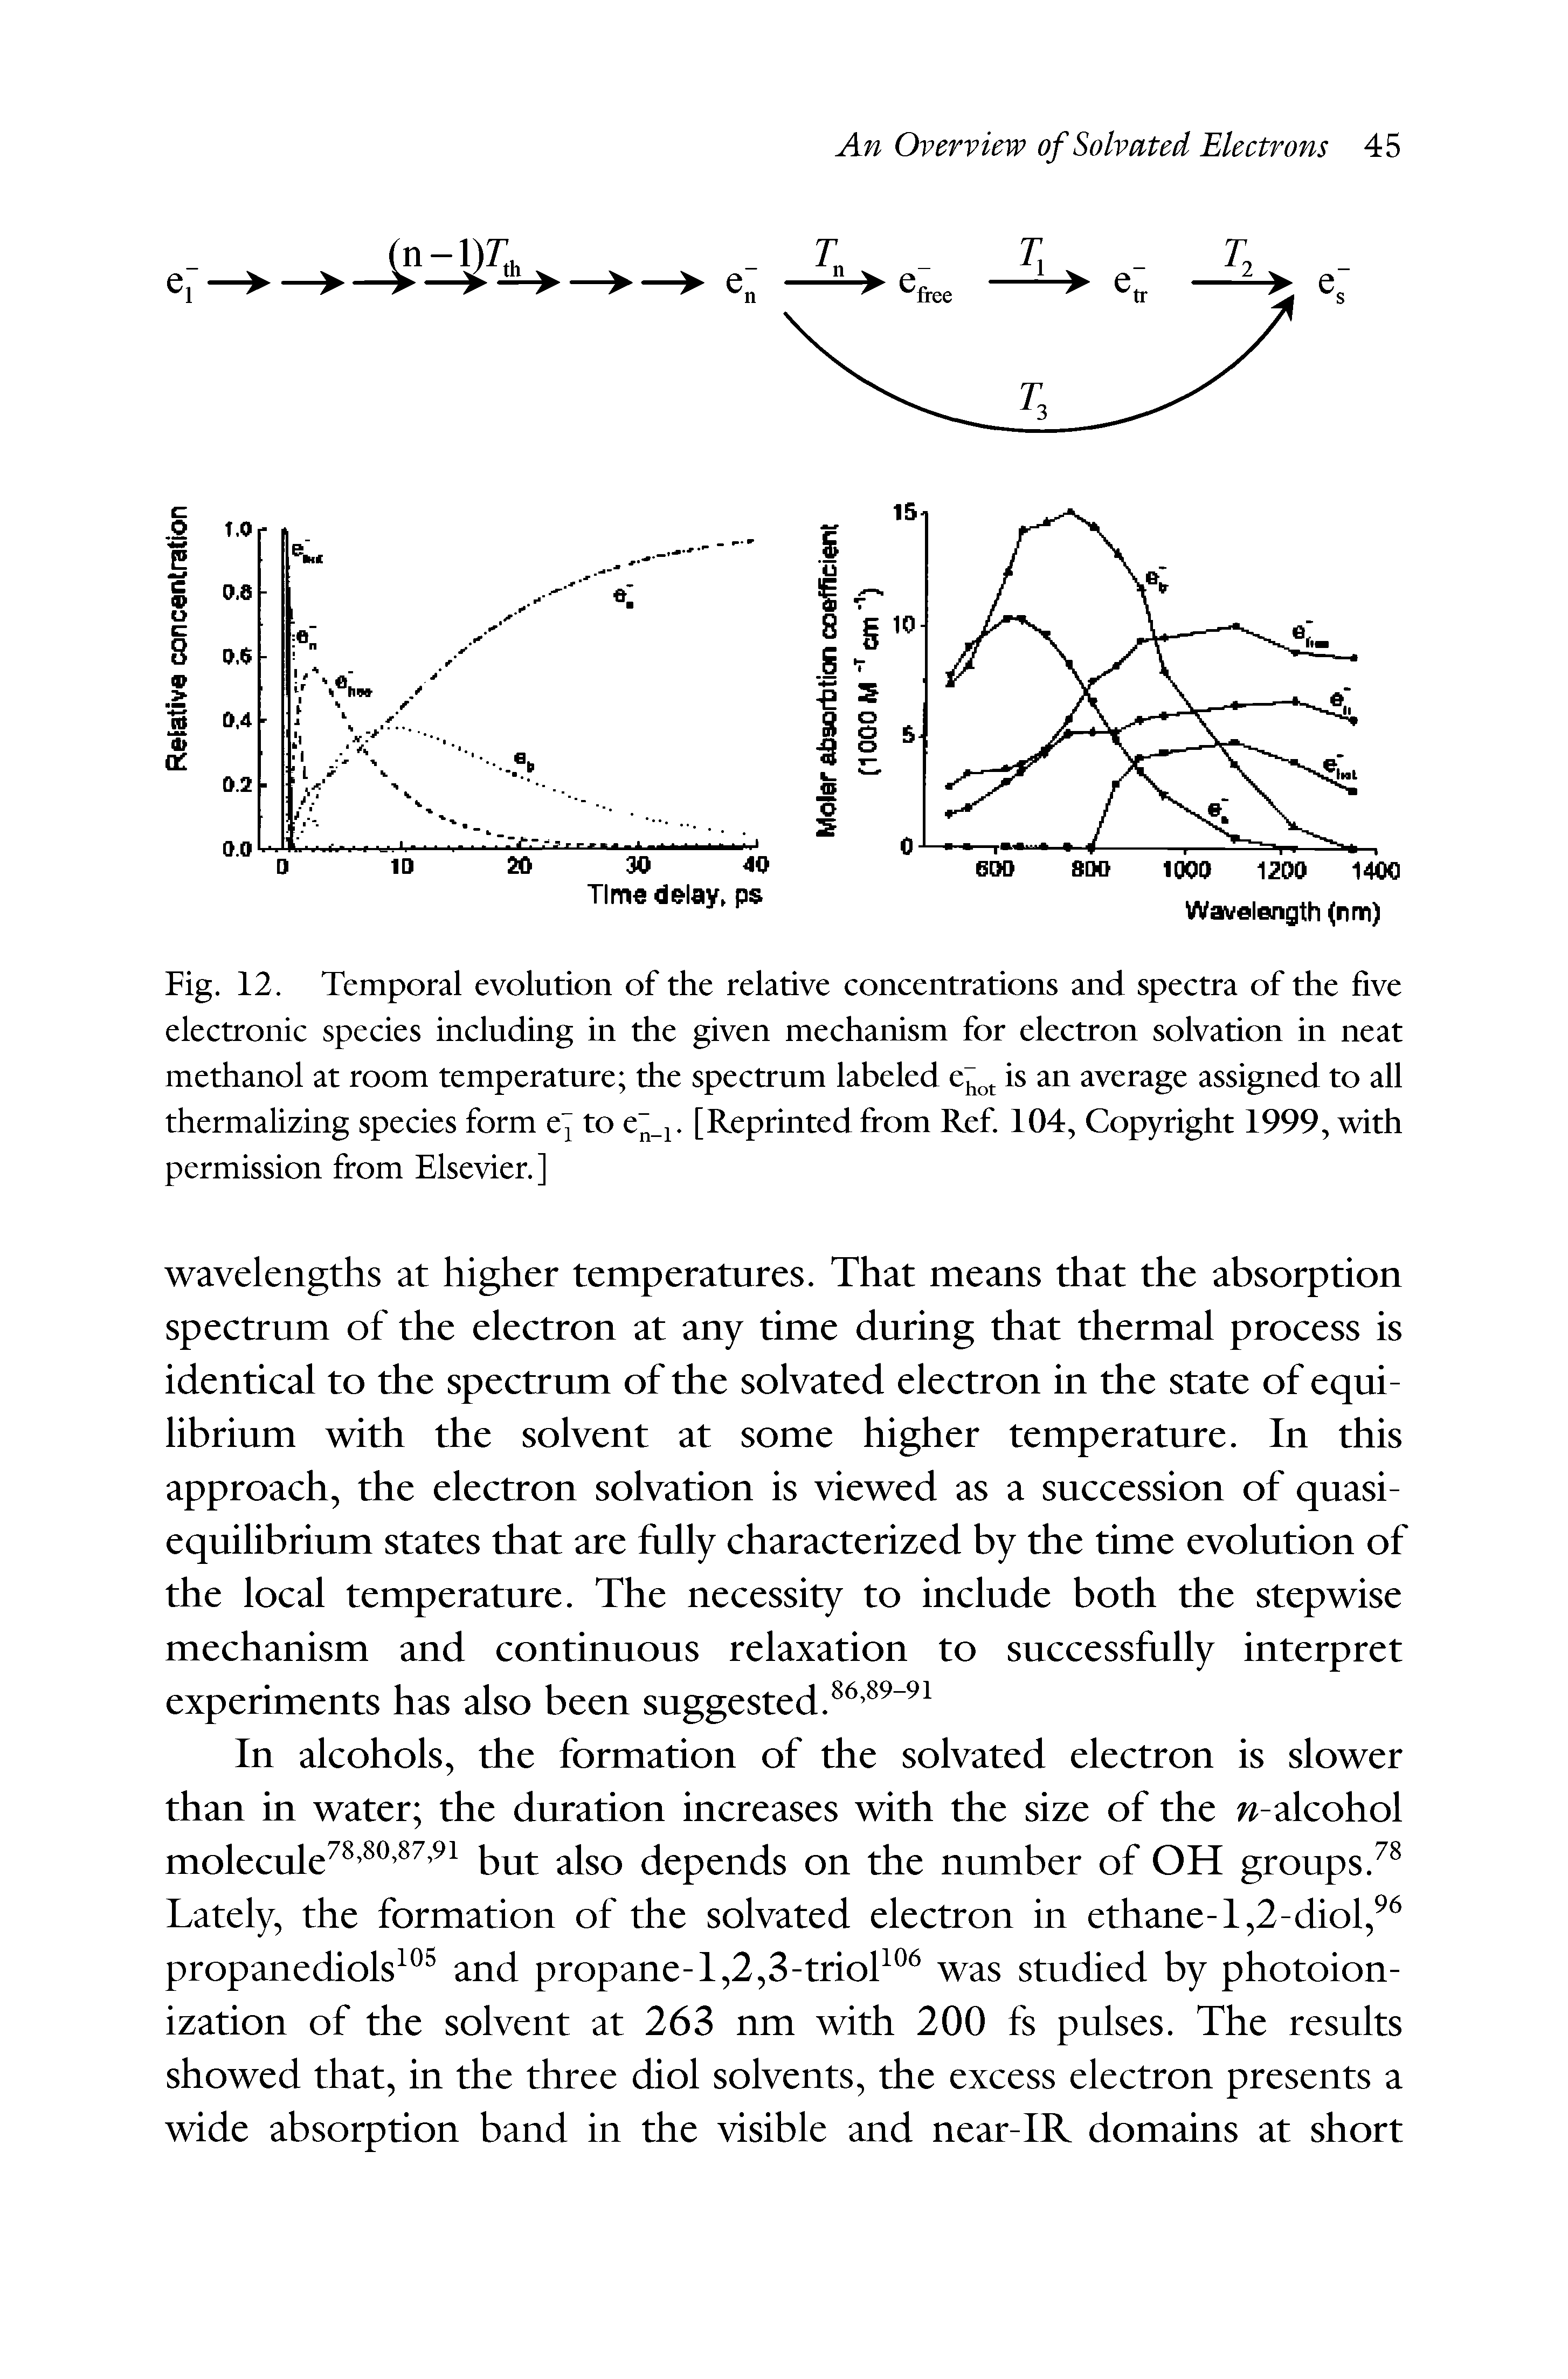 Fig. 12. Temporal evolution of the relative concentrations and spectra of the five electronic species including in the given mechanism for electron solvation in neat methanol at room temperature the spectrum labeled e is an average assigned to all thermalizing species form e to e i. [Reprinted from Ref. 104, Copyright 1999, with permission from Elsevier.]...